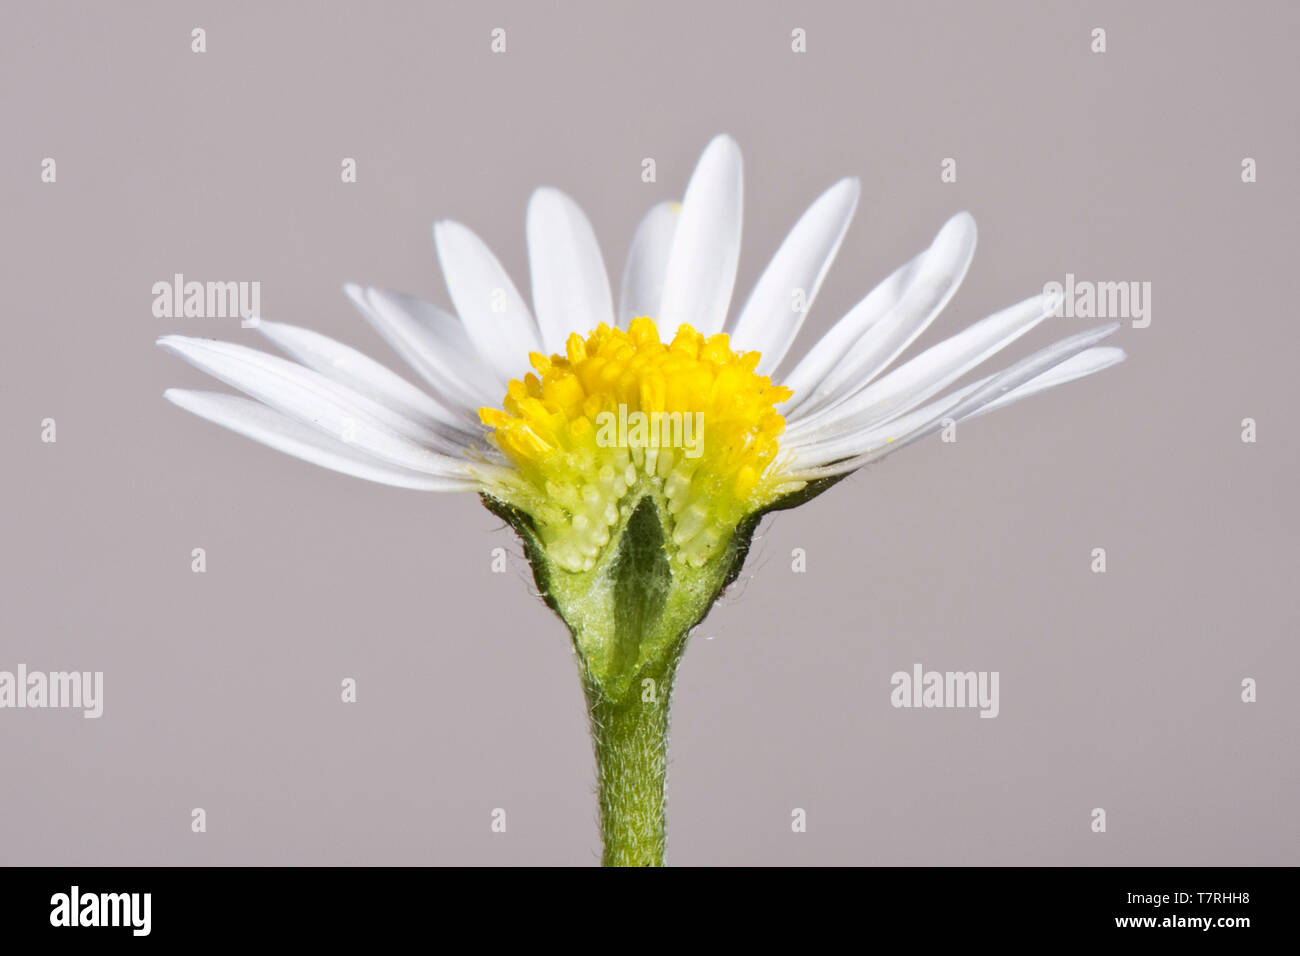 White ray and yellow disk florets (flowers) of a daisy (Bellis perennis) a typical composite flower structure (Asteraceae) Stock Photo